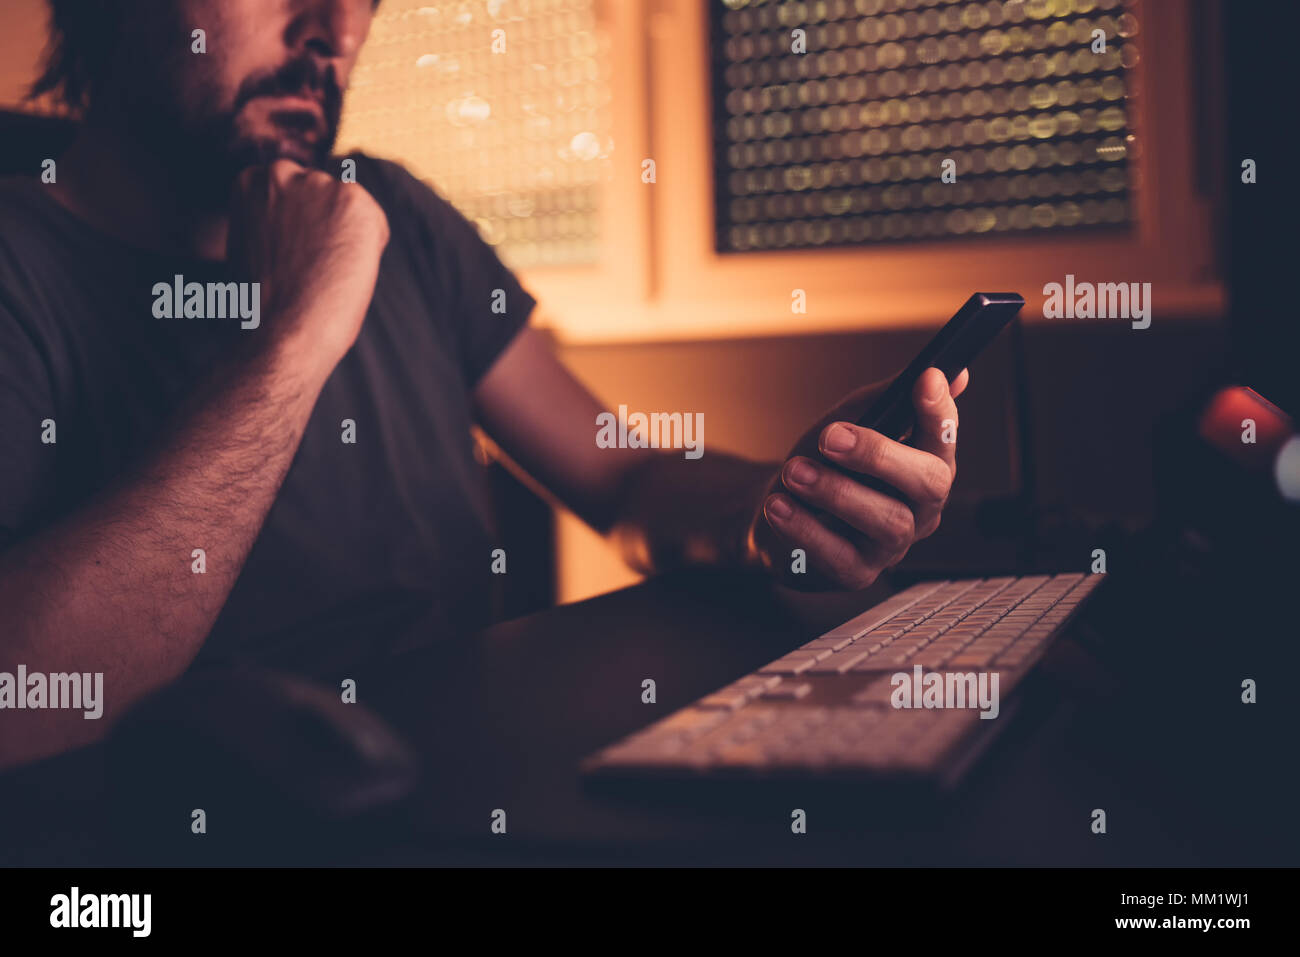 Bored man wasting time using mobile phone in dark home office interior, low key with selective focus Stock Photo